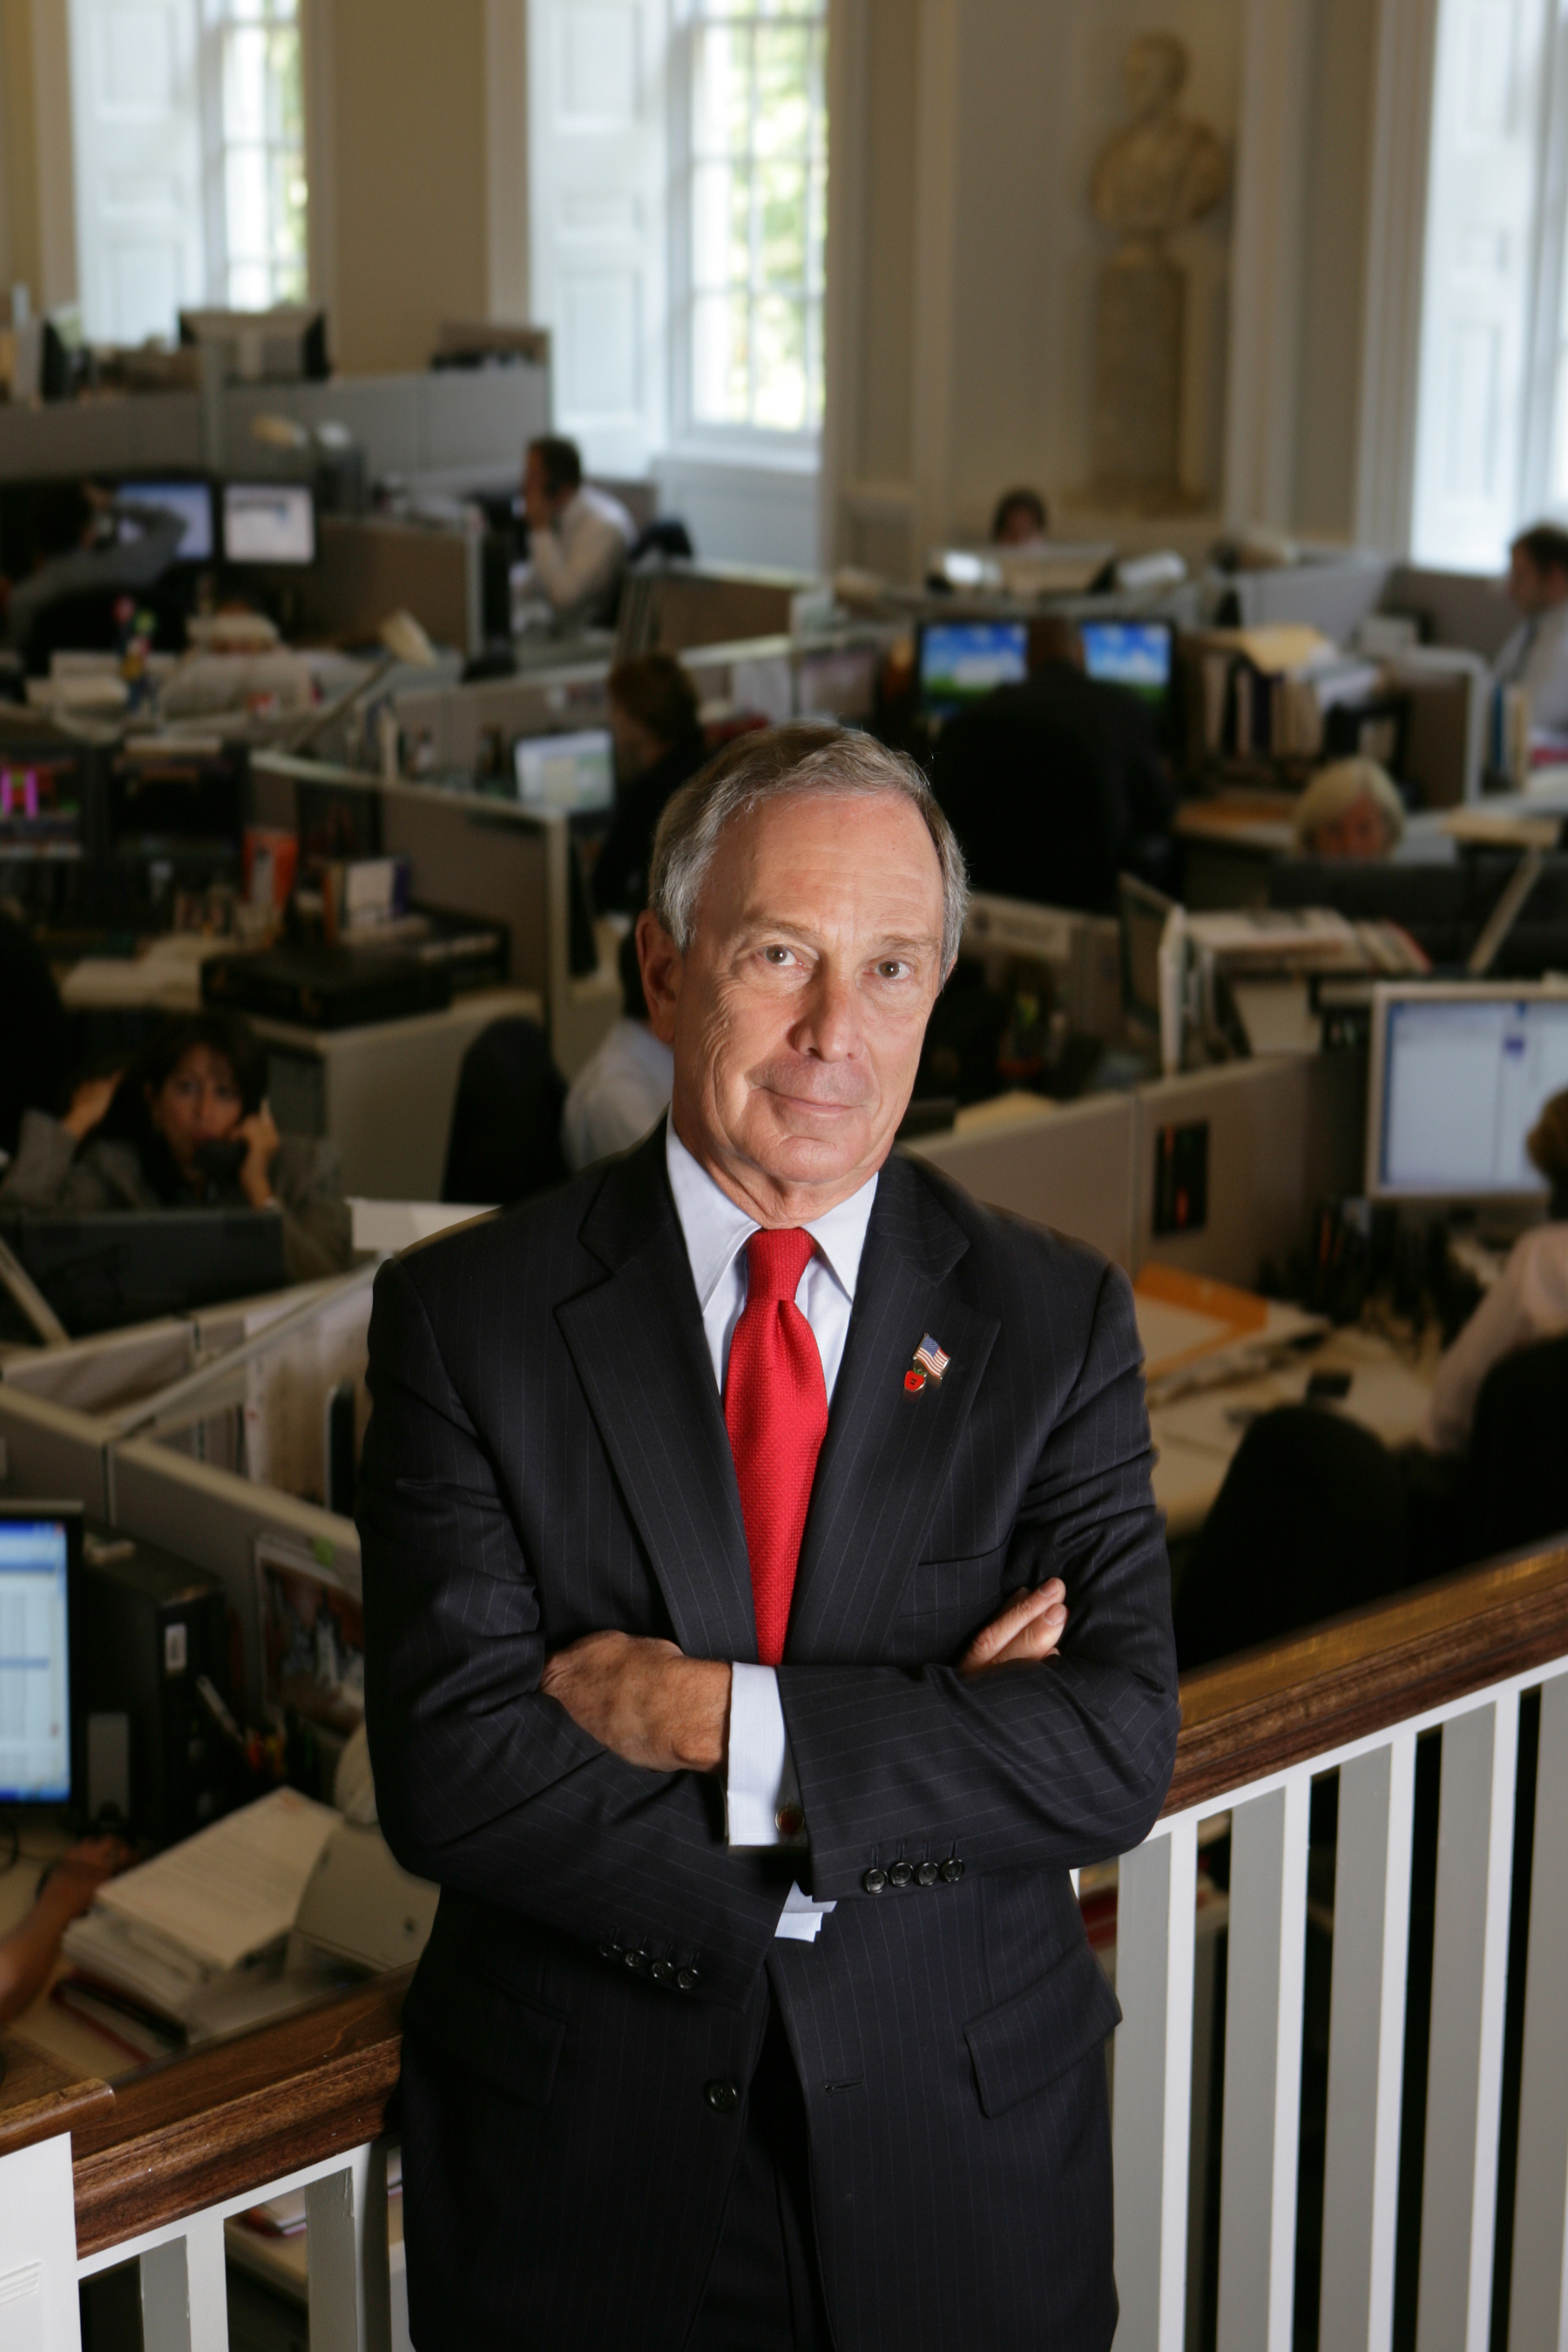 UPDATE 2-Bloomberg presidential campaign reports $409 million in total spending so far